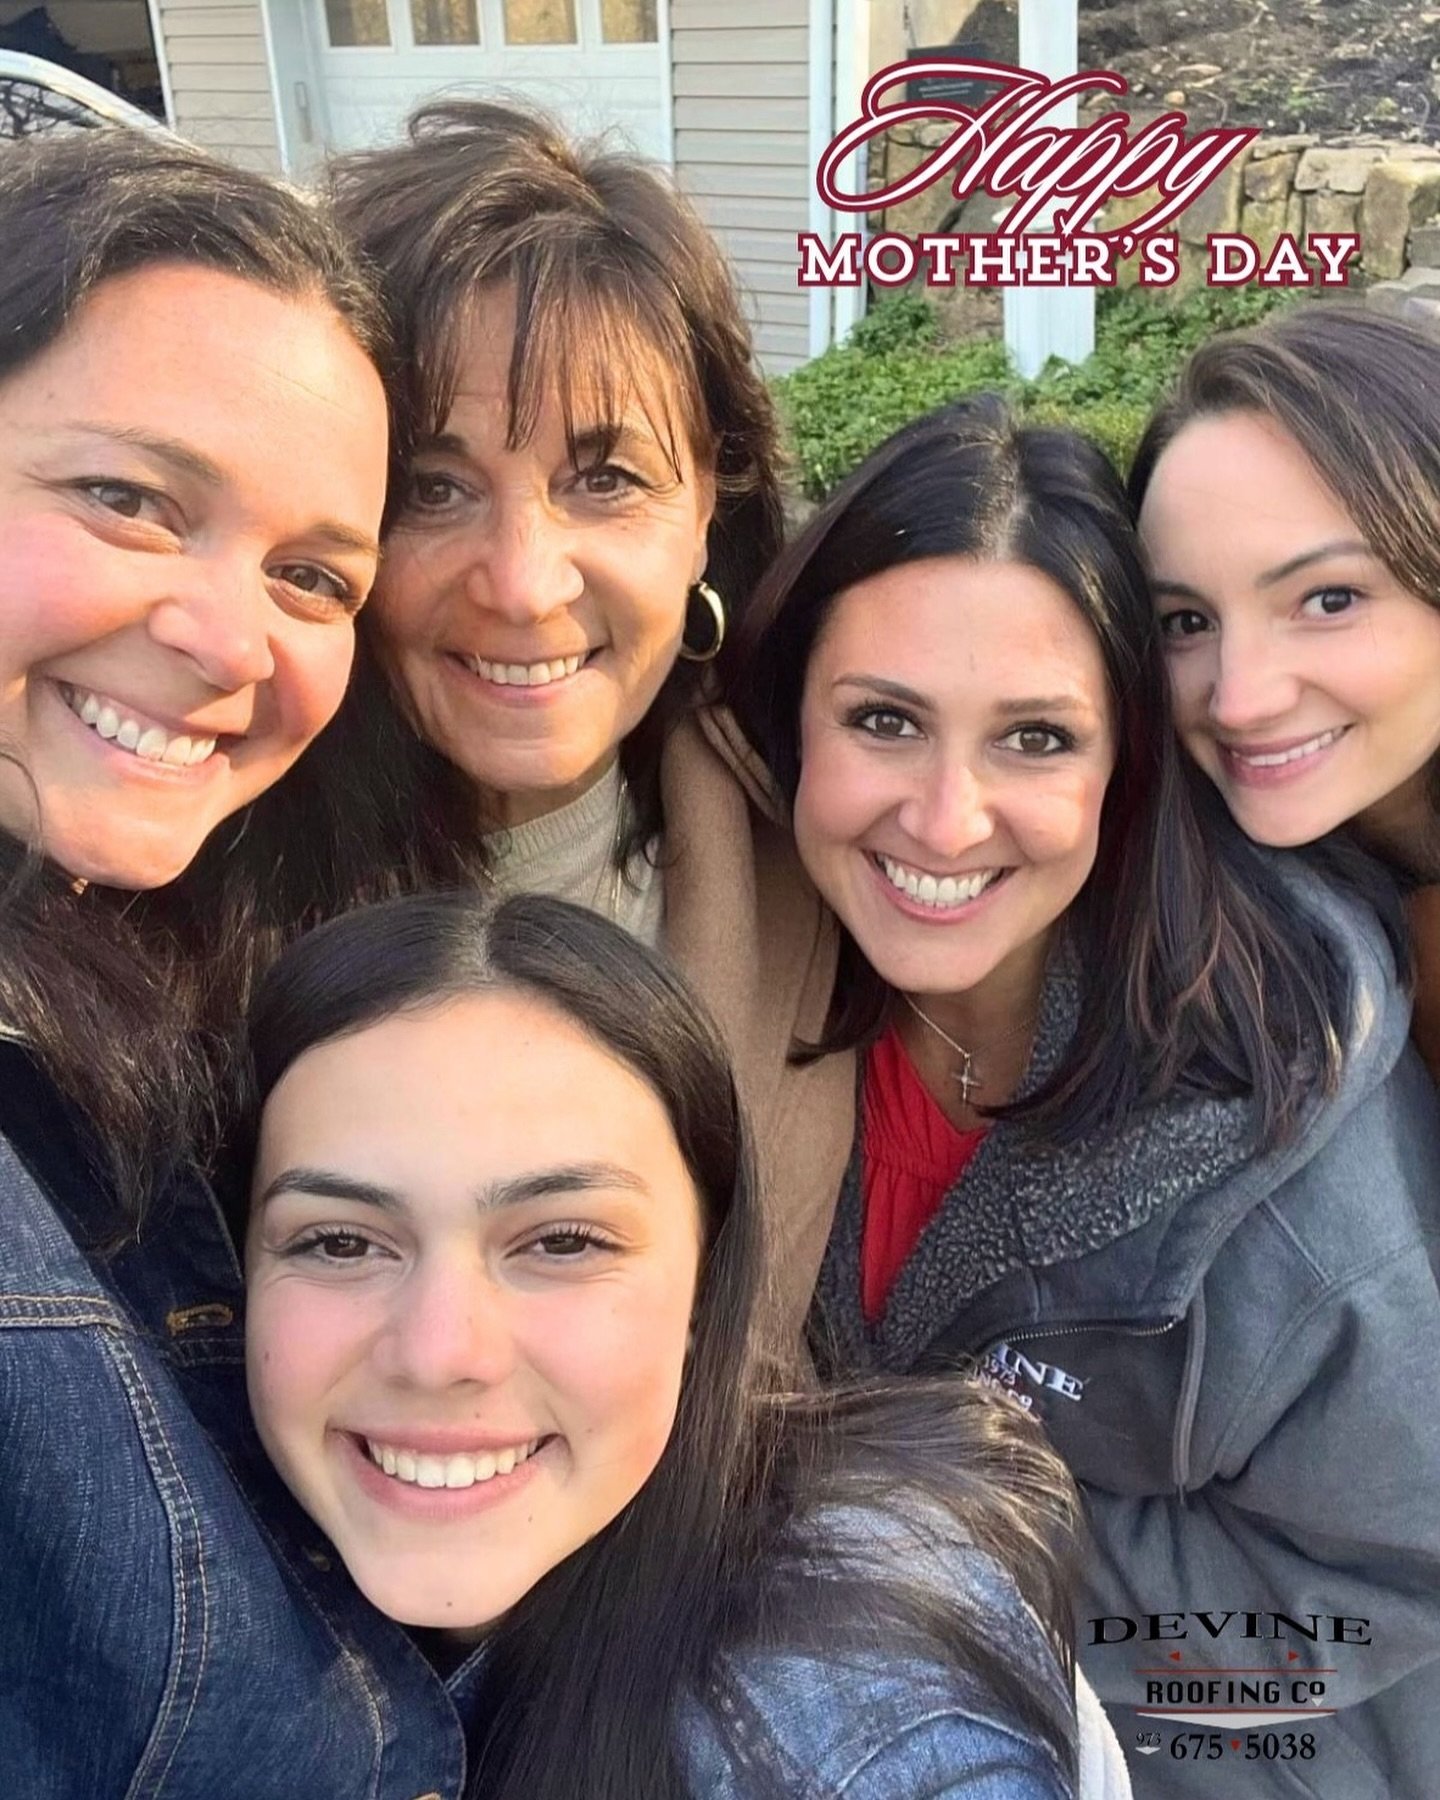 Happy Mother&rsquo;s Day to the Moms of Devine Roofing and every incredible mother out there! 💐
.
.
.
.
.
.
.
(roof, nj roofer, roofing, nj contractor, new jersey contractor, ny, nyc, new york contractor, industrial, commercial, residential construc